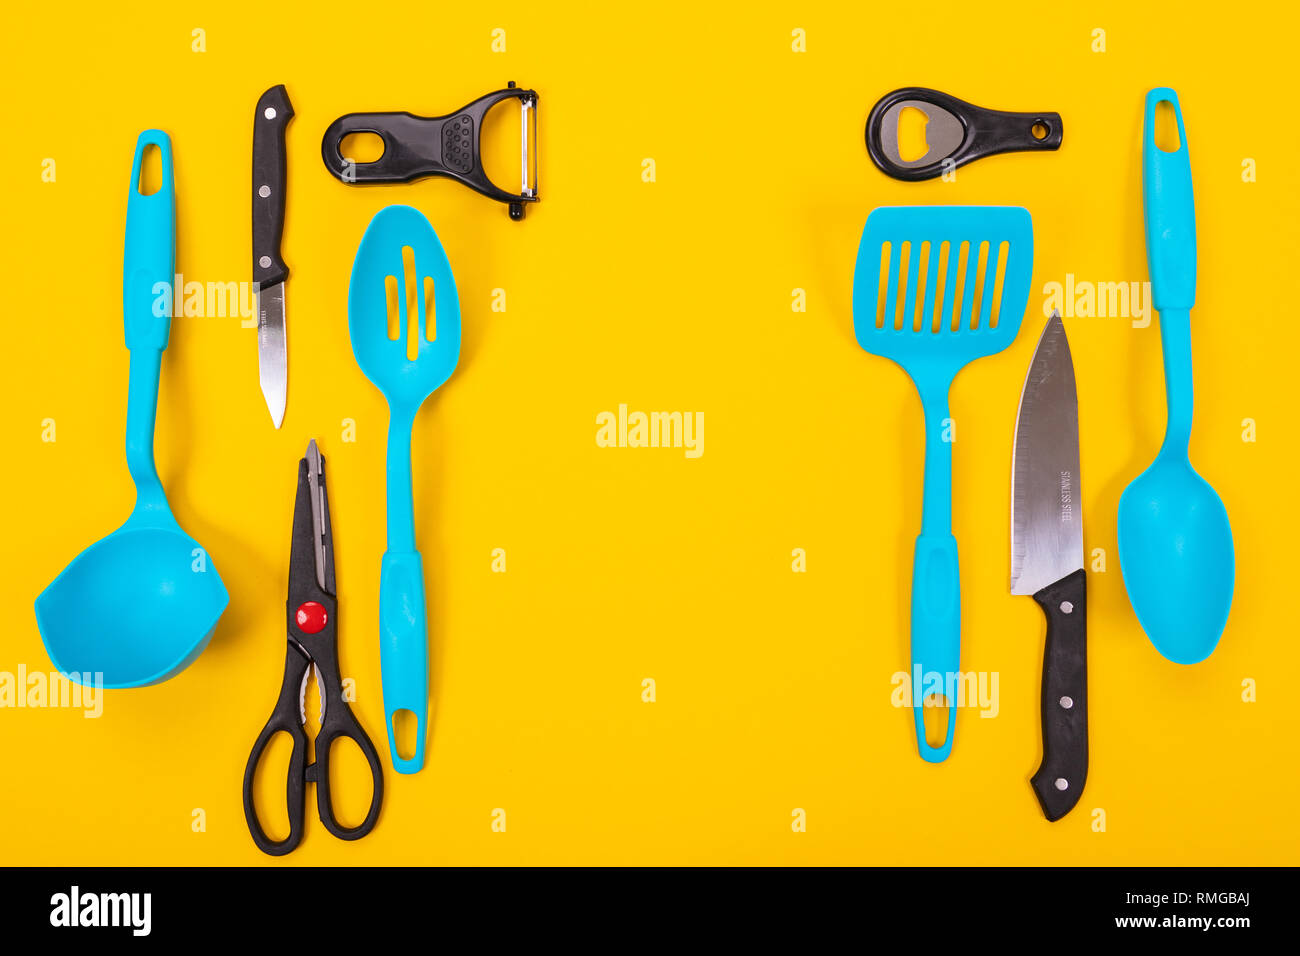 top view of stylish kitchen utensils isolated on yellow background Stock Photo